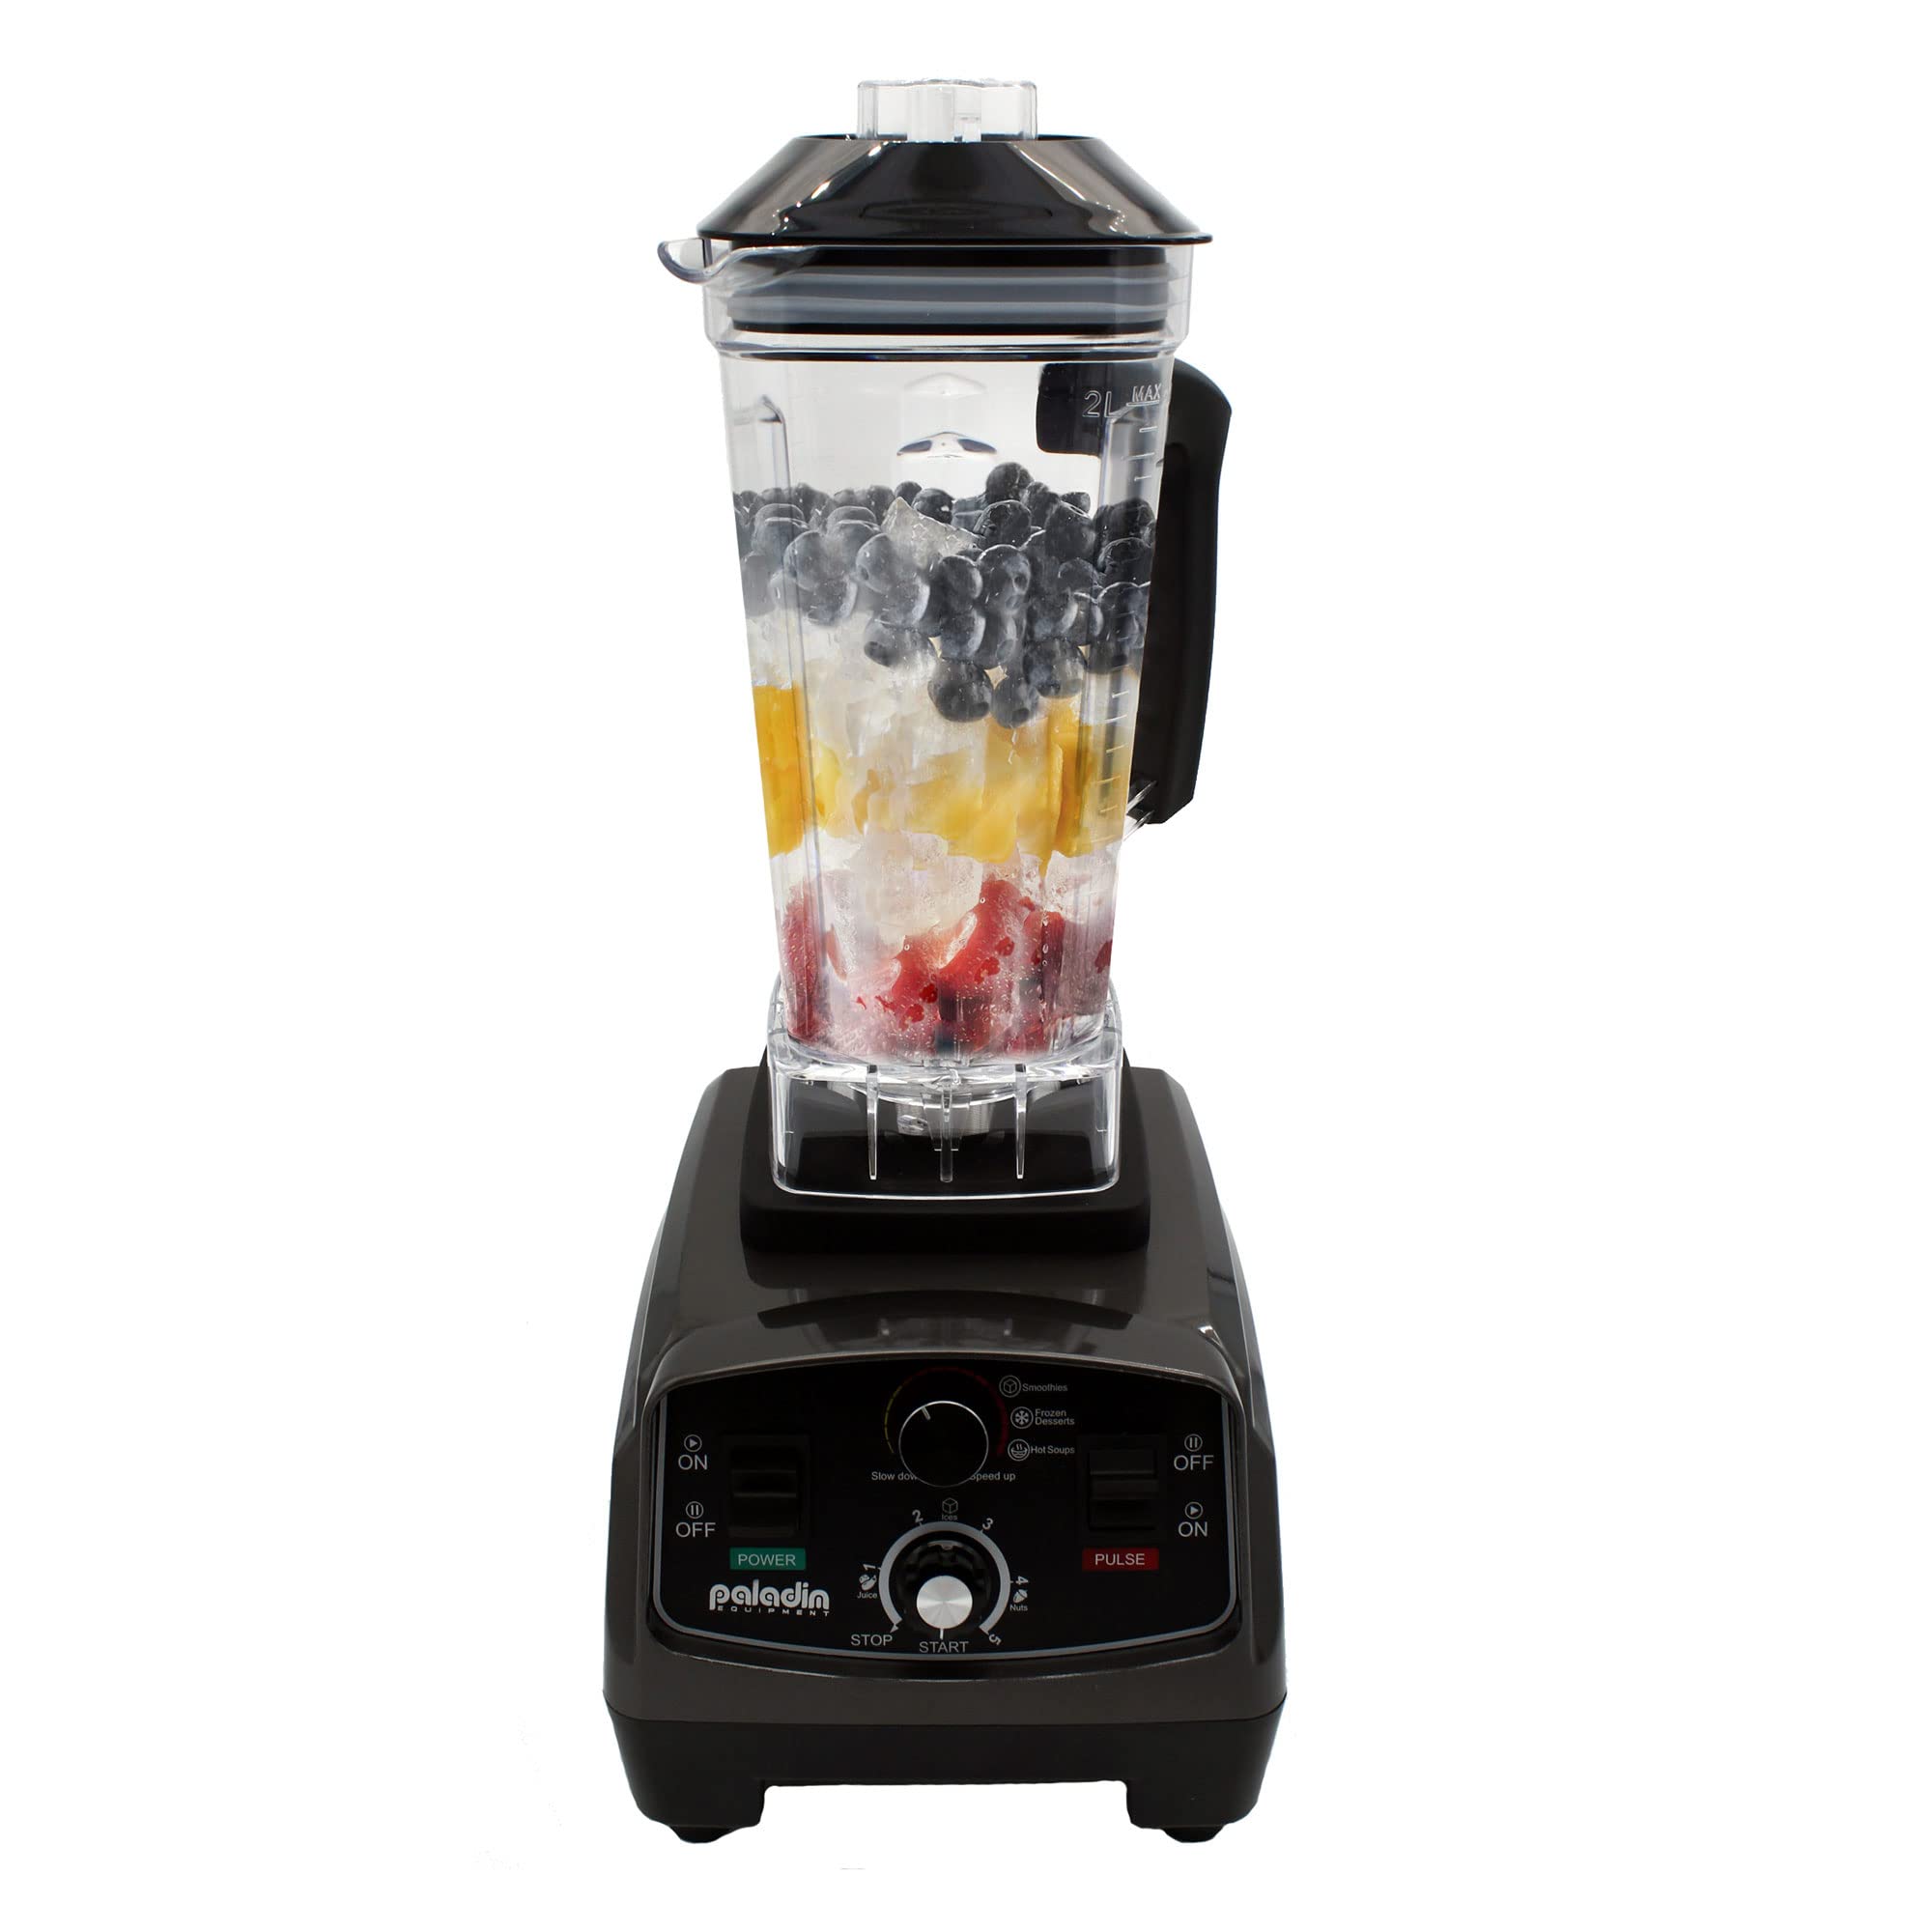 Paladin Equipment Commercial/Professional Blender for Smoothies, Soups, Shakes and More with 2,000mL (68oz) BPA-Free Jar and 1,600W Motor, Black